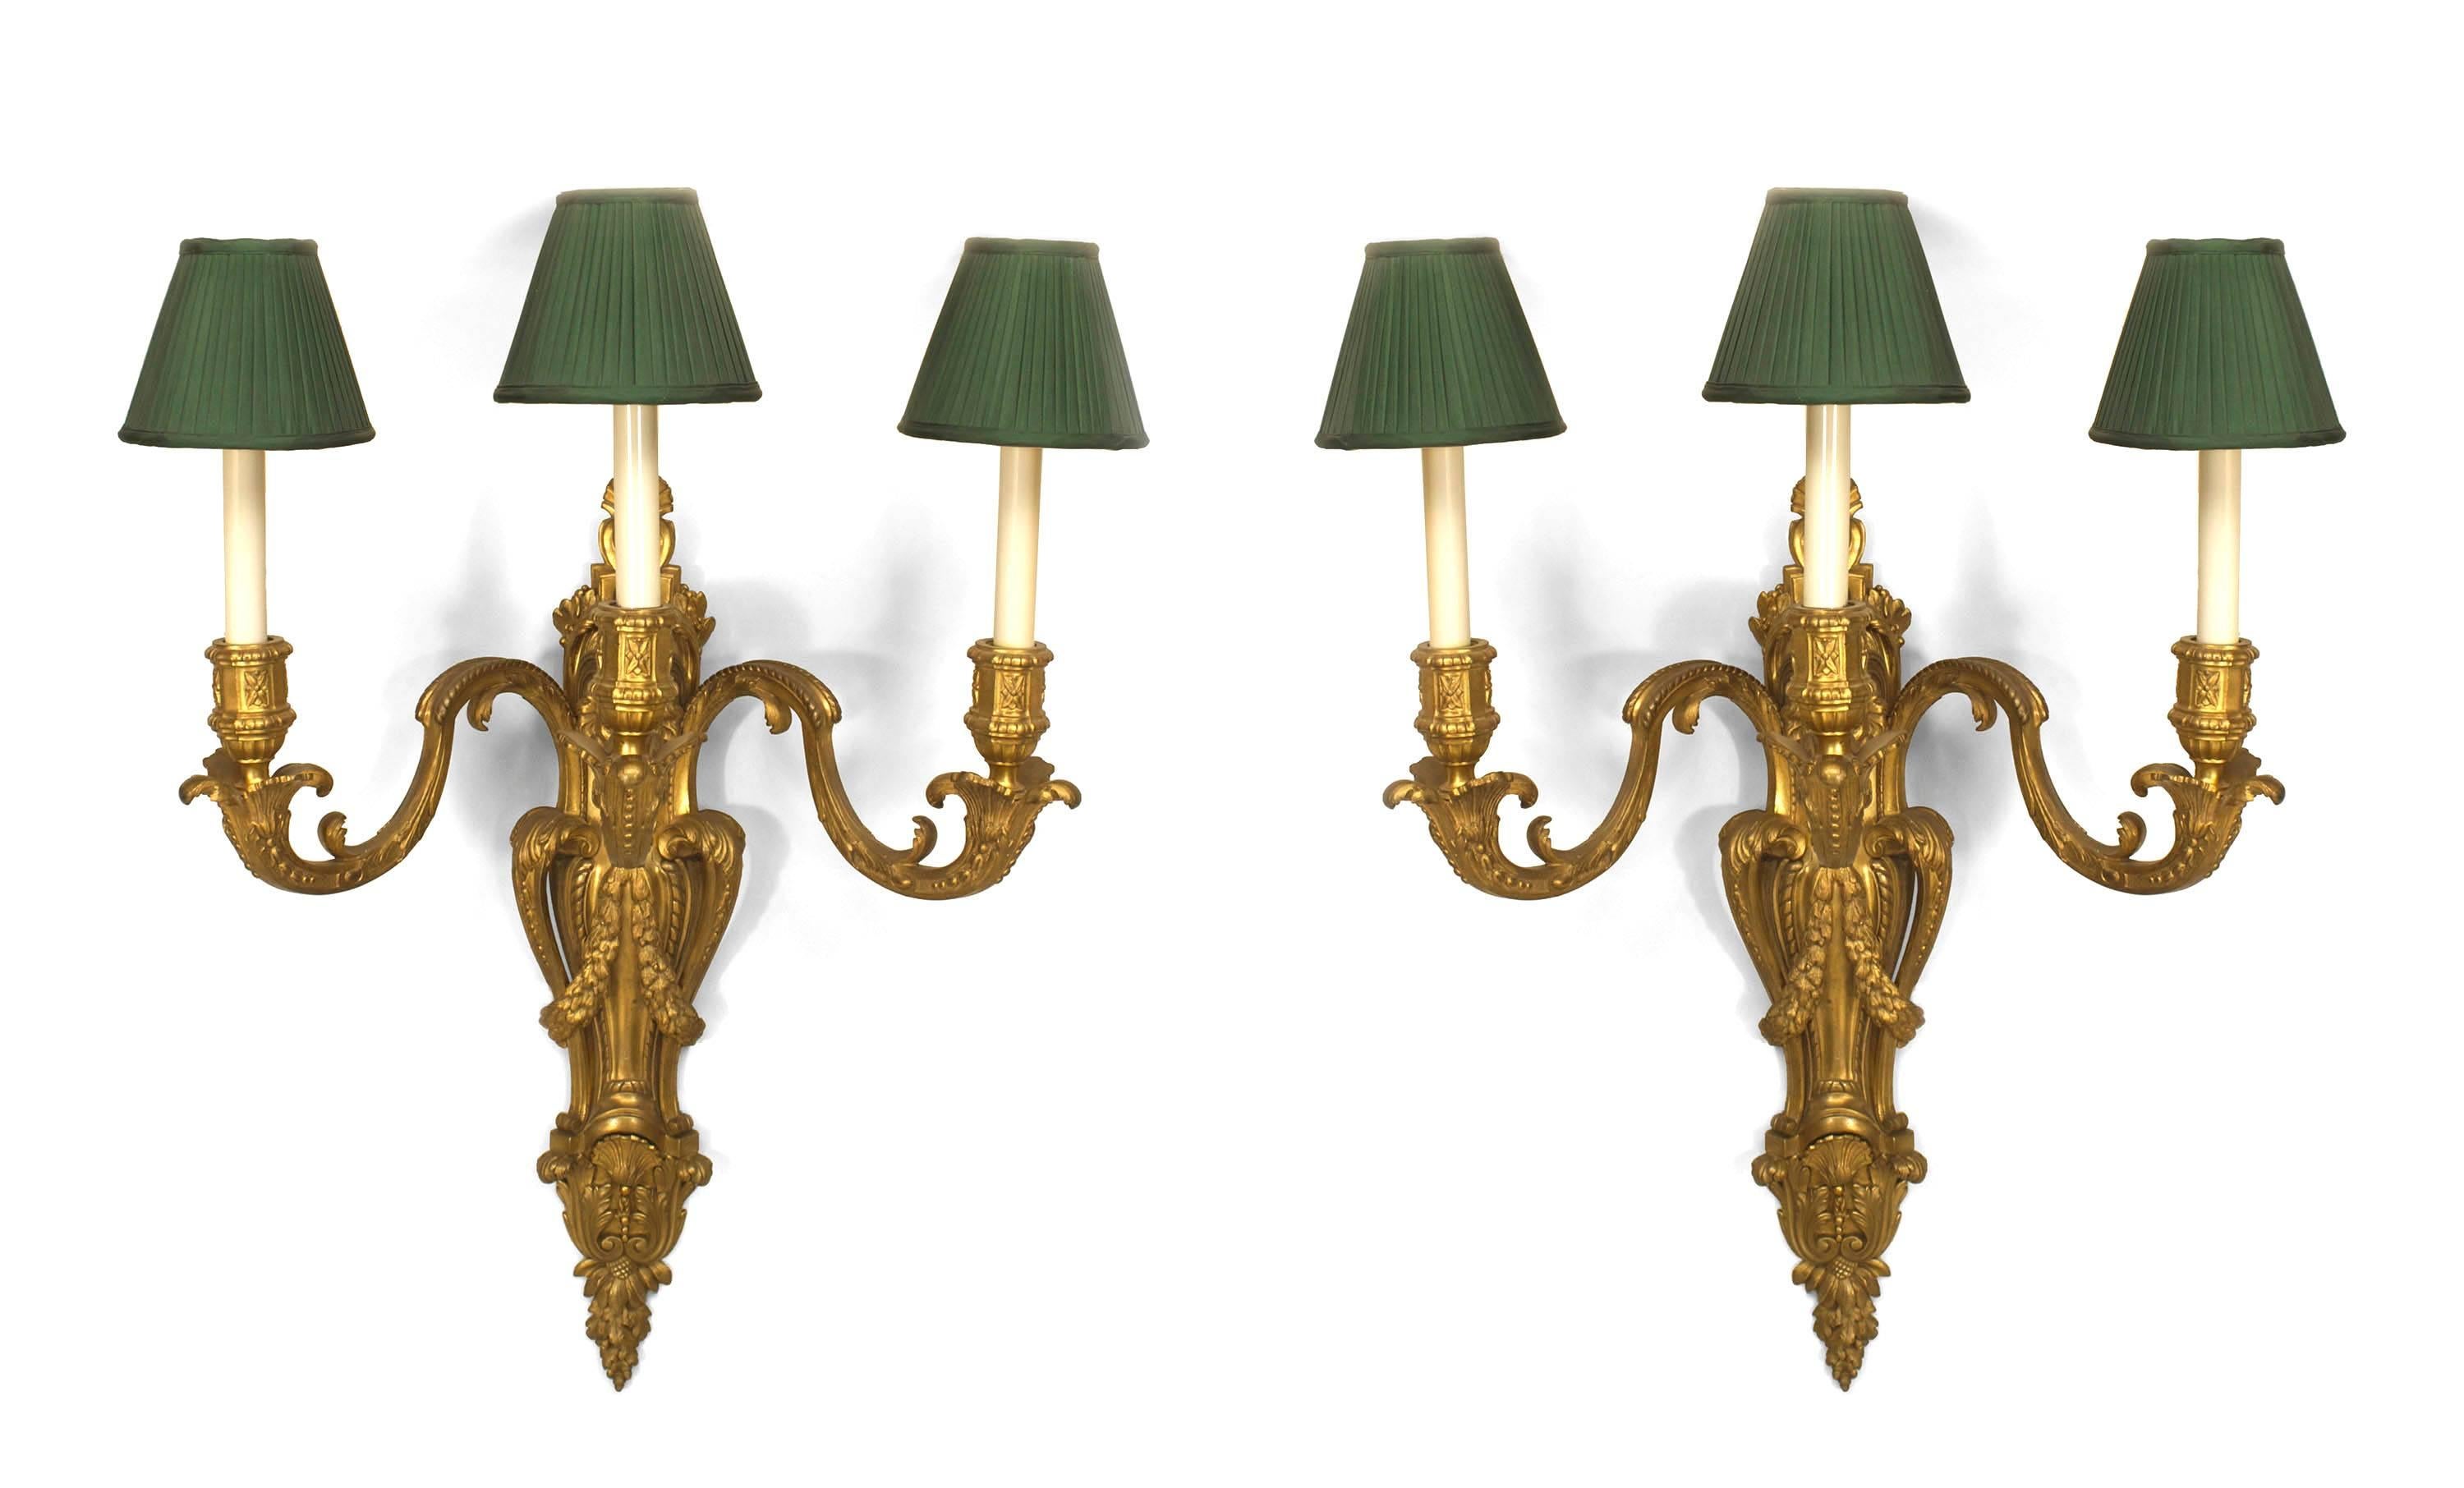 Pair of Louis XV-style (19/20th Century) bronze wall sconces with three scroll arms, a centered lion head with swags, and green pleated fabric shades (PRICED AS Pair)
